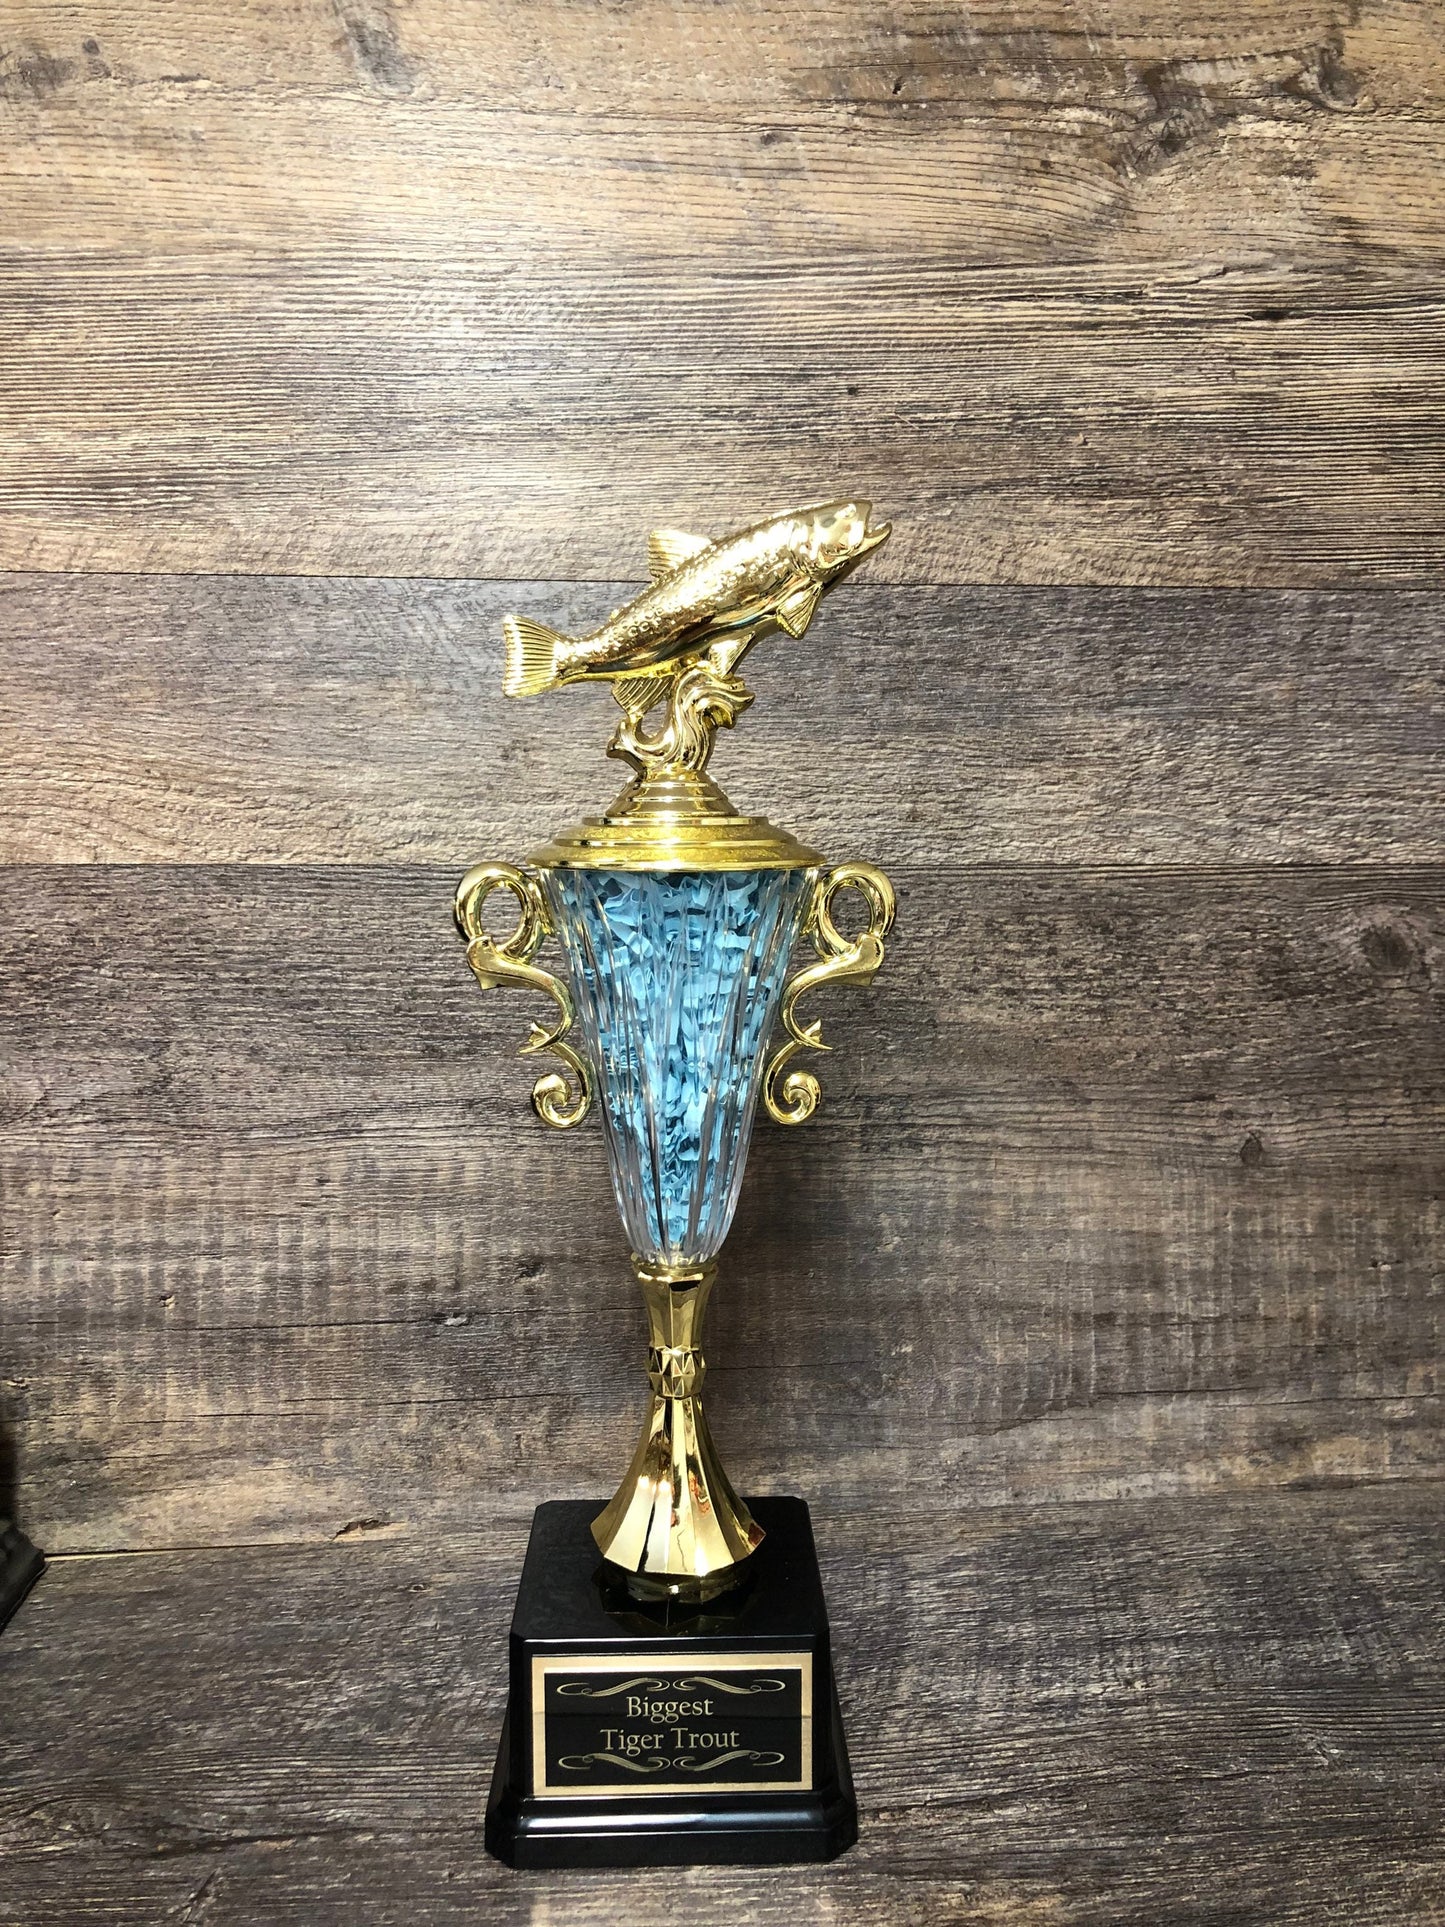 Fishing Trophy Fishing Derby Tournament Trophy Award Biggest Bass Biggest Trout Fish Personalized Trophy Biggest Fish Competition Winner